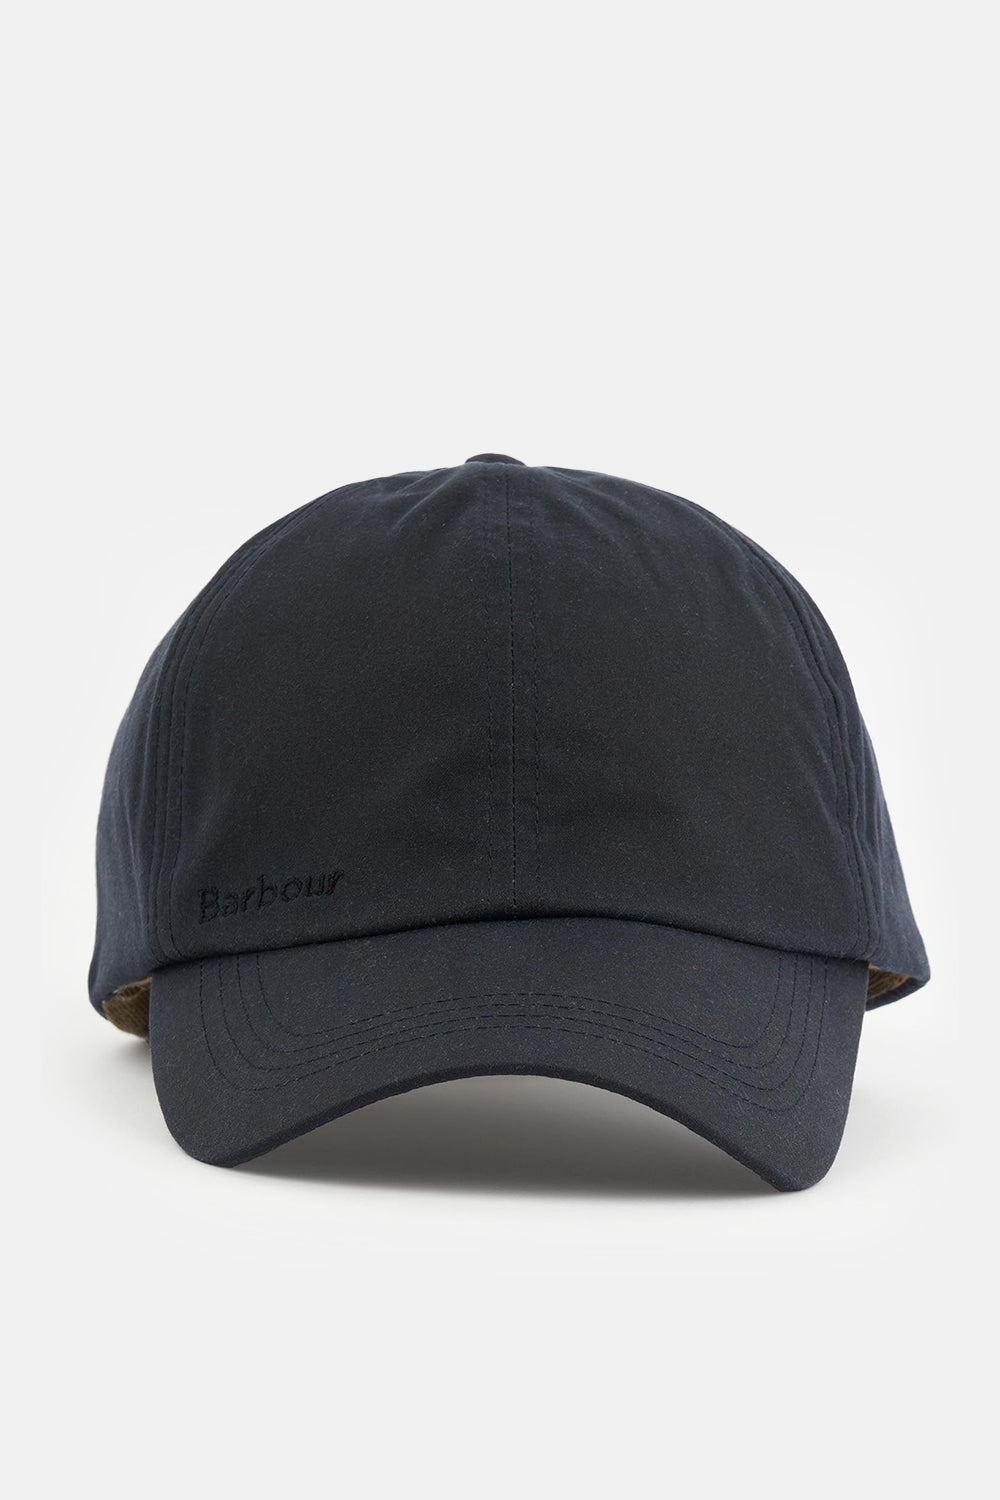 Barbour Waxed Jacket Sports Cap (Navy) | Number Six